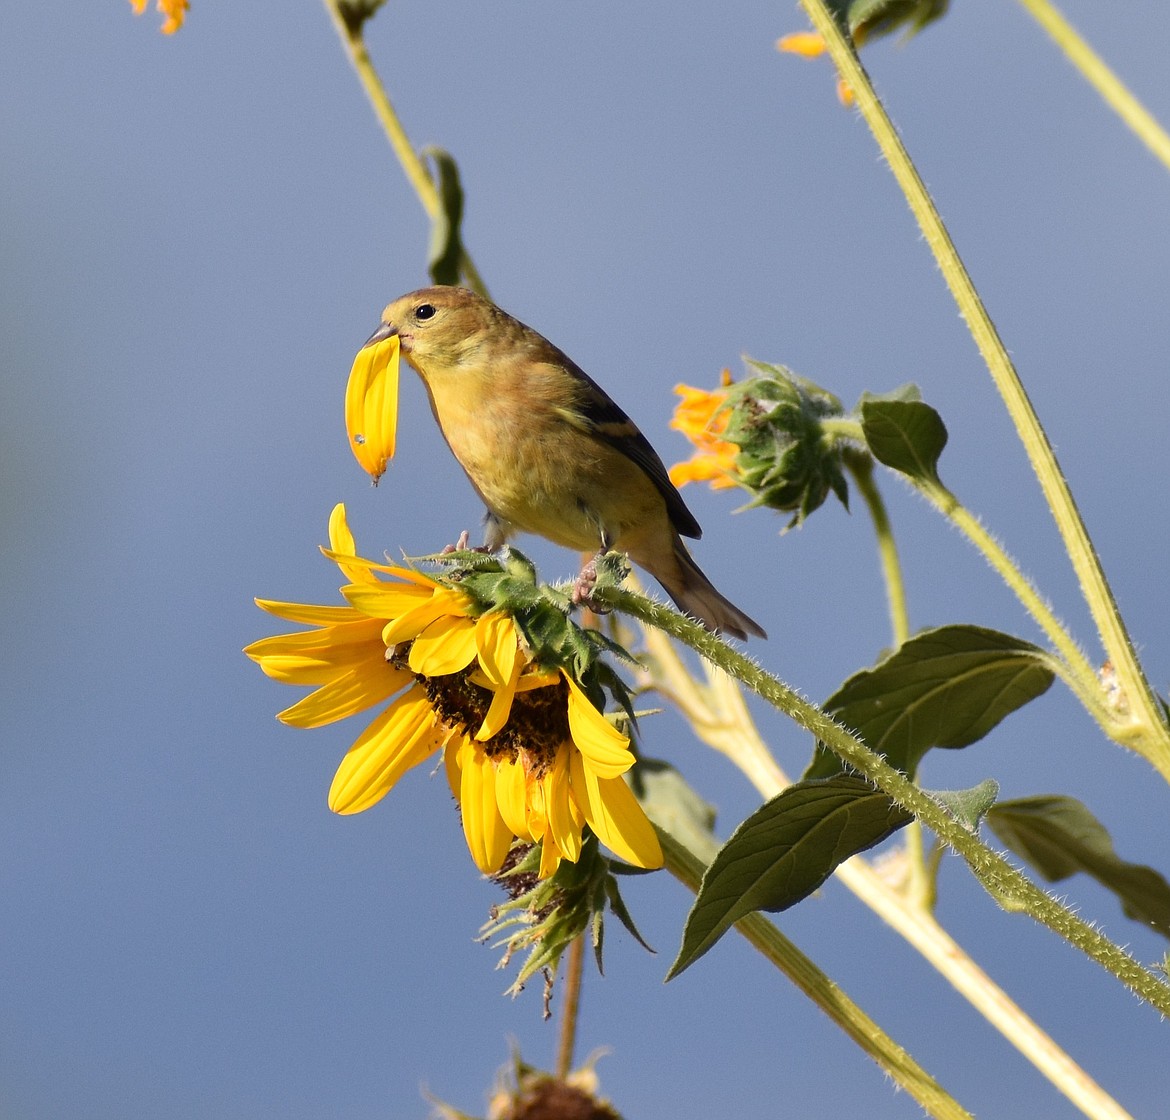 A bird snacks on a sunflower in the yard of Moses Lake photographer Paula Zanter-Stout.